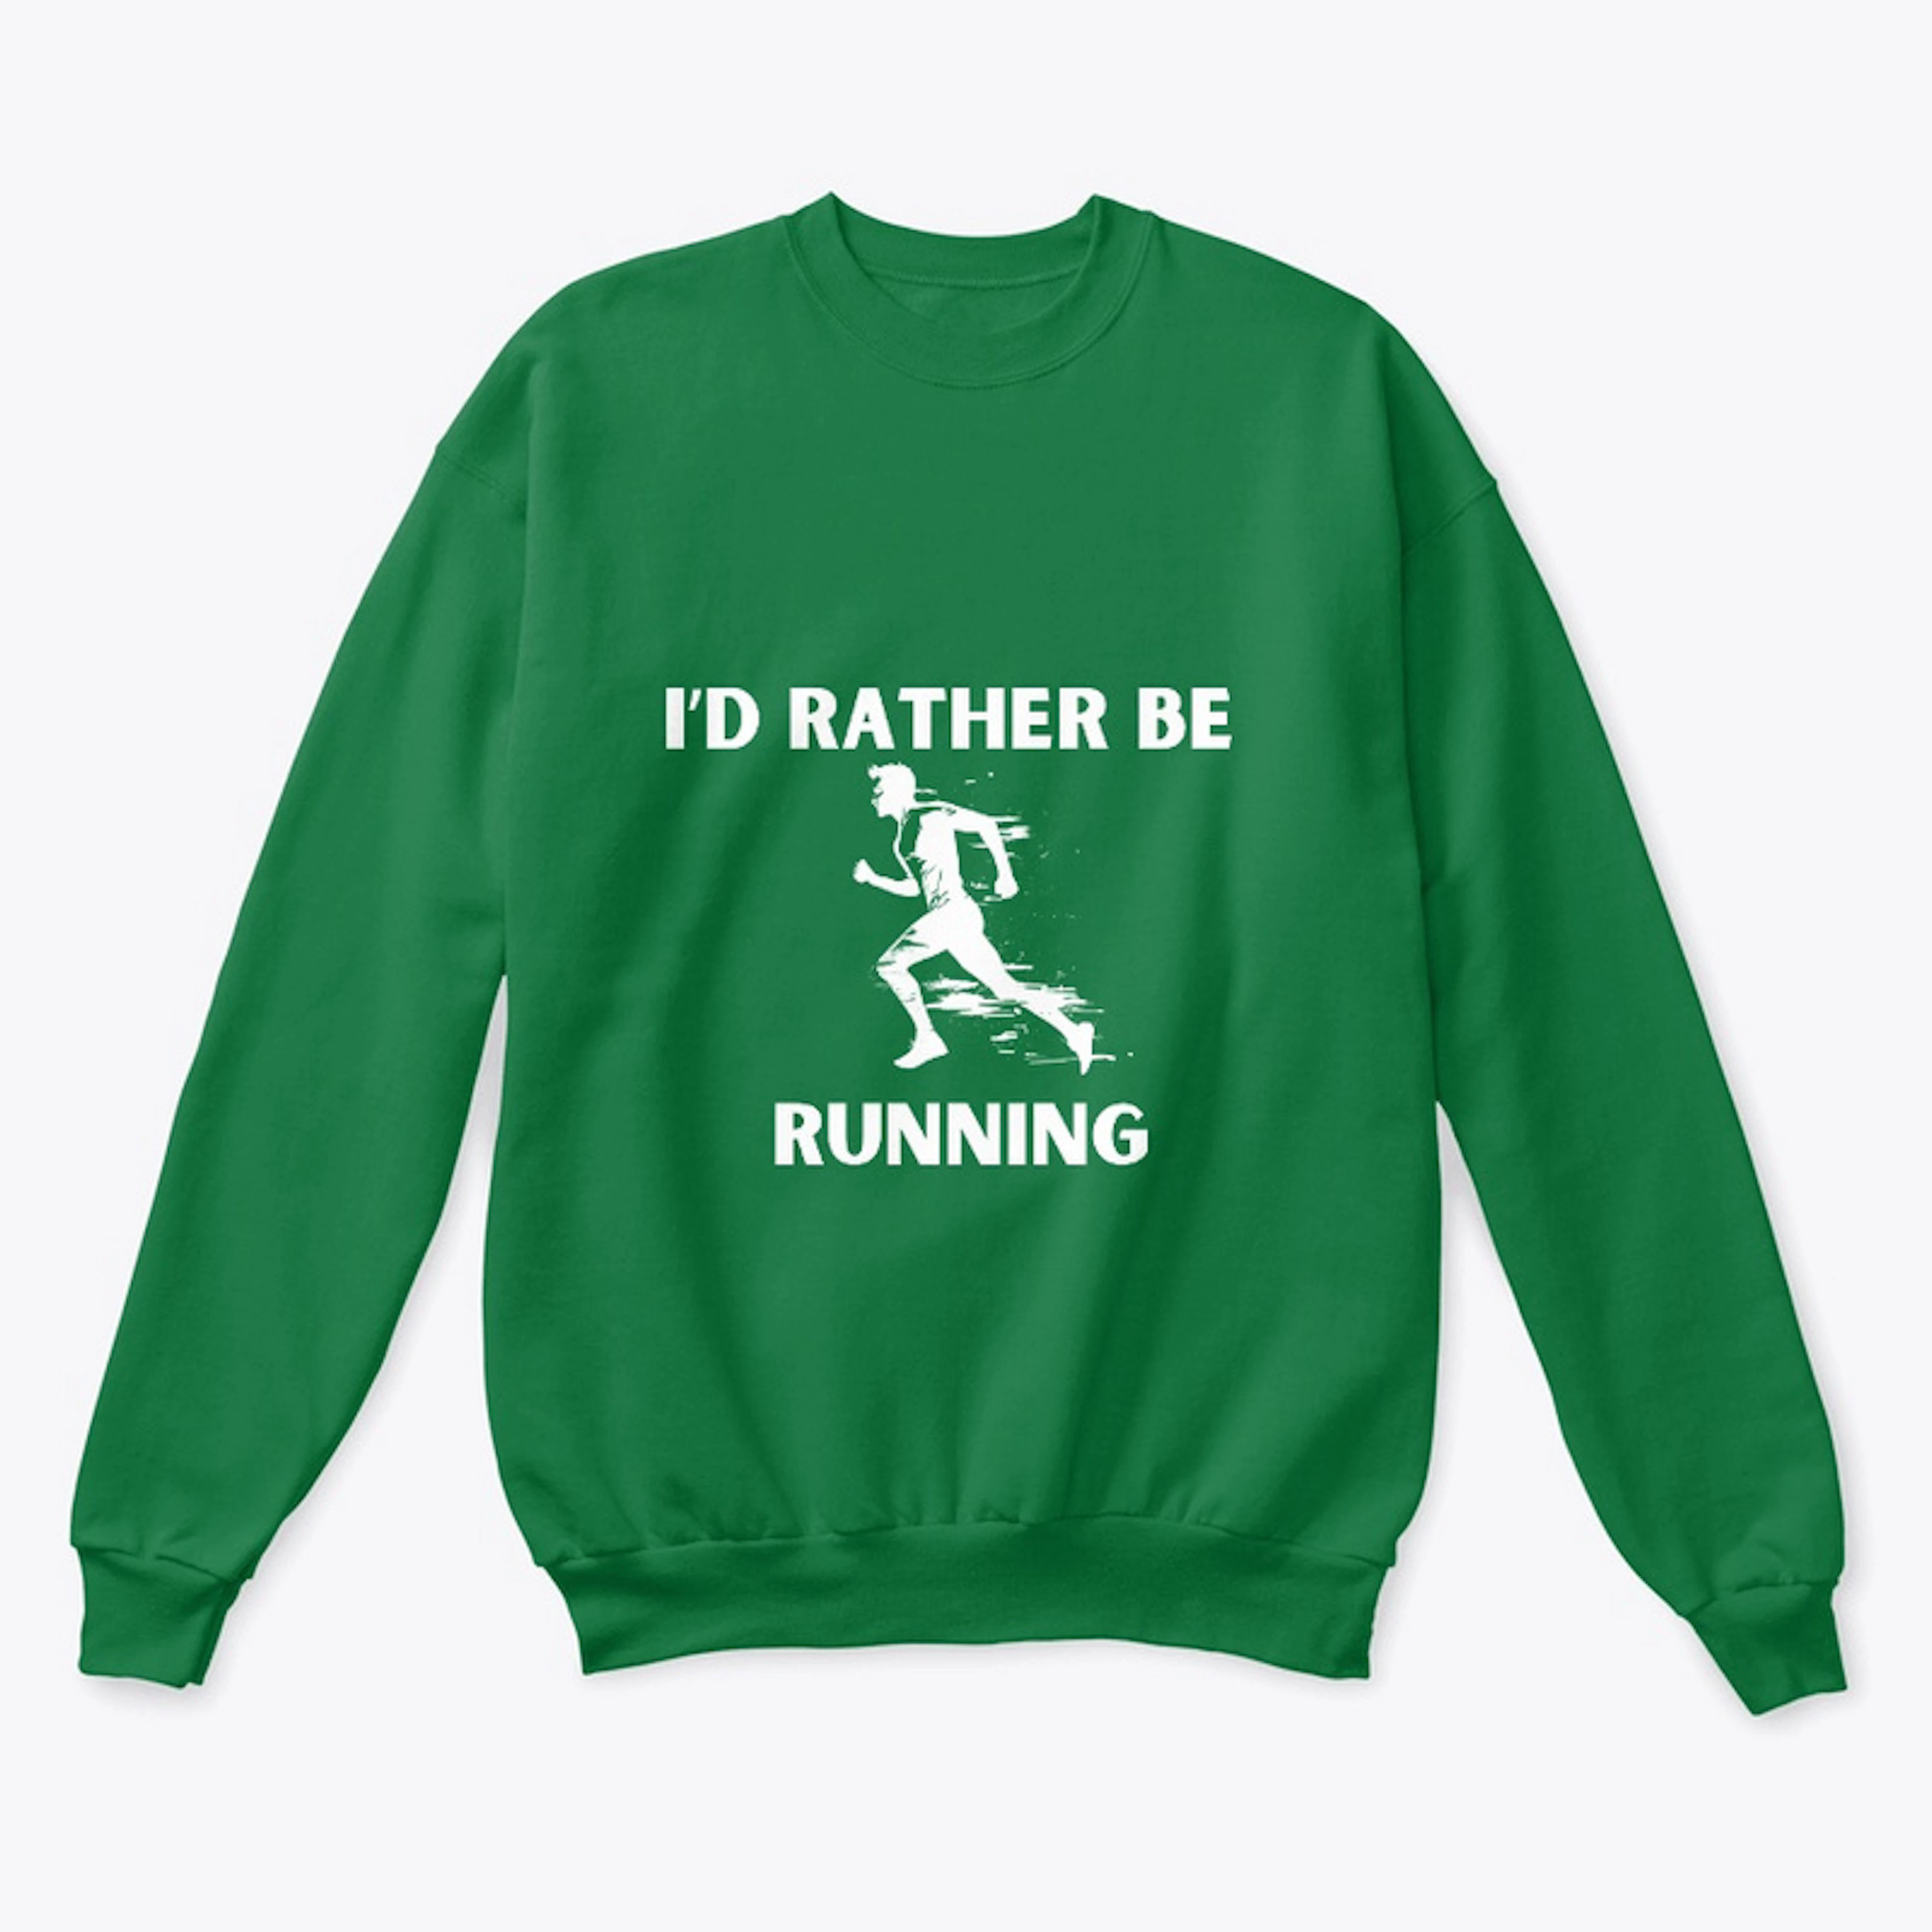 I"d Rather Be Running